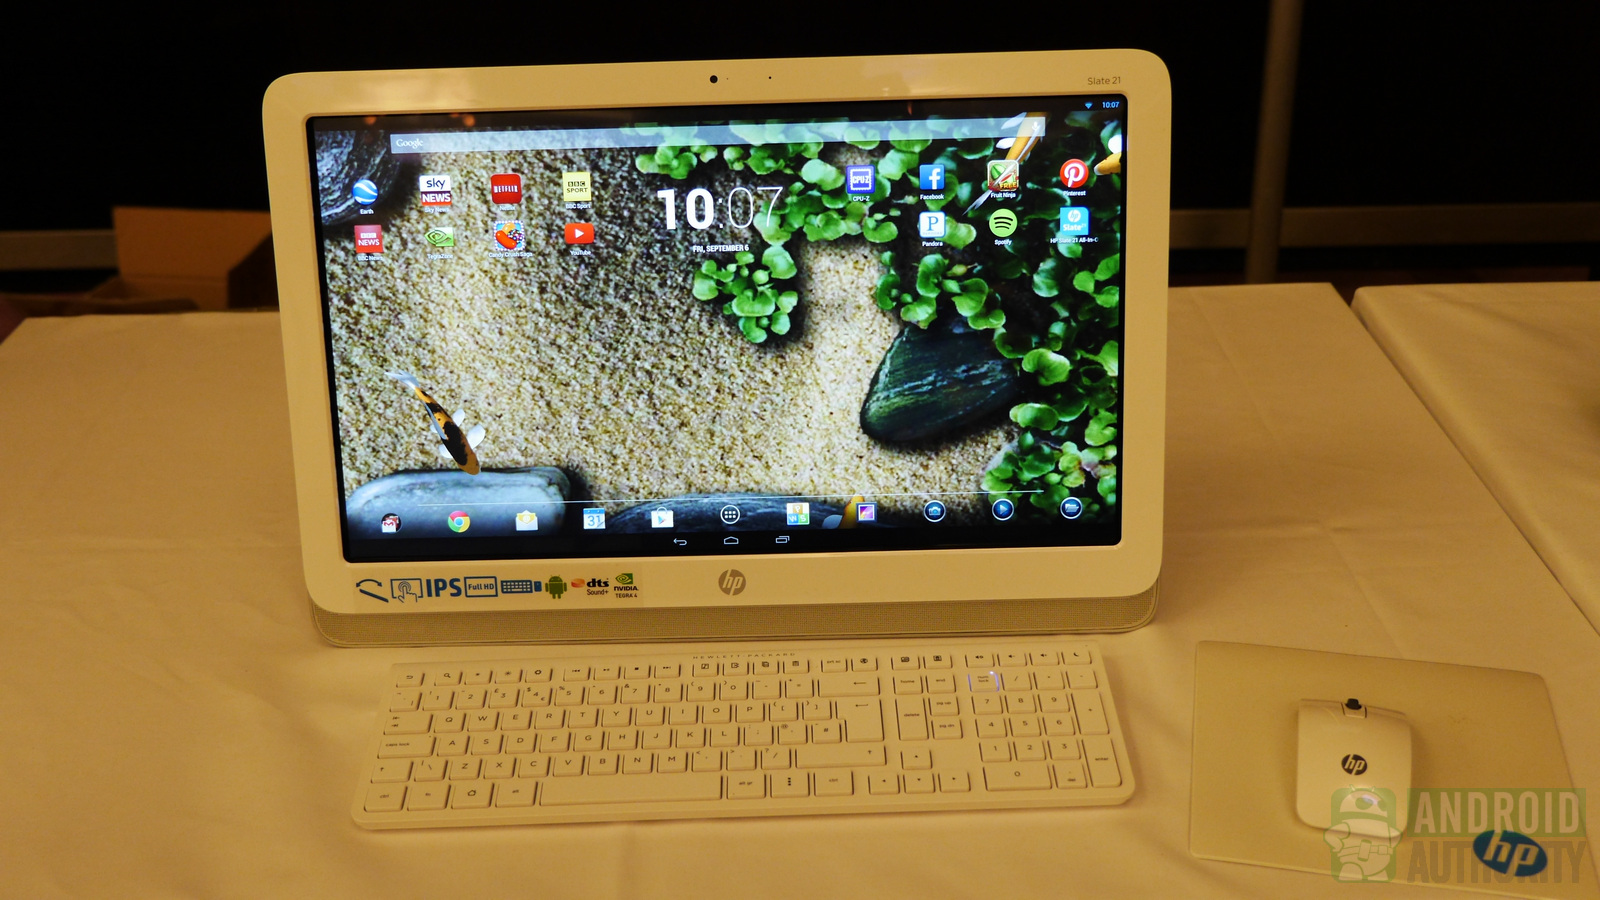 HP Slate 21, HP's largest screen Android device.